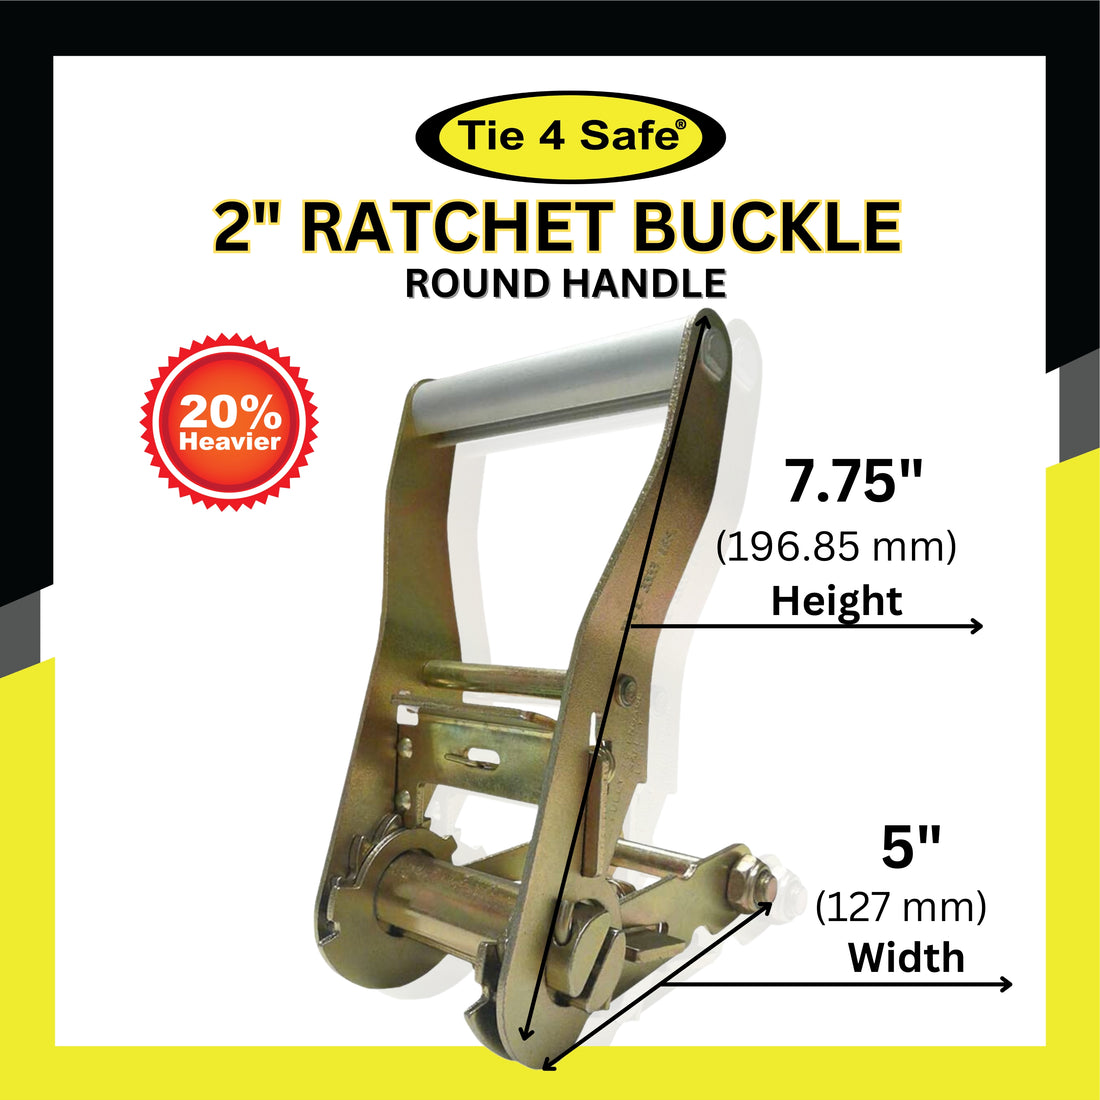 2" Ratchet Buckle With Handle Alum Grip. Double Security Corrugated